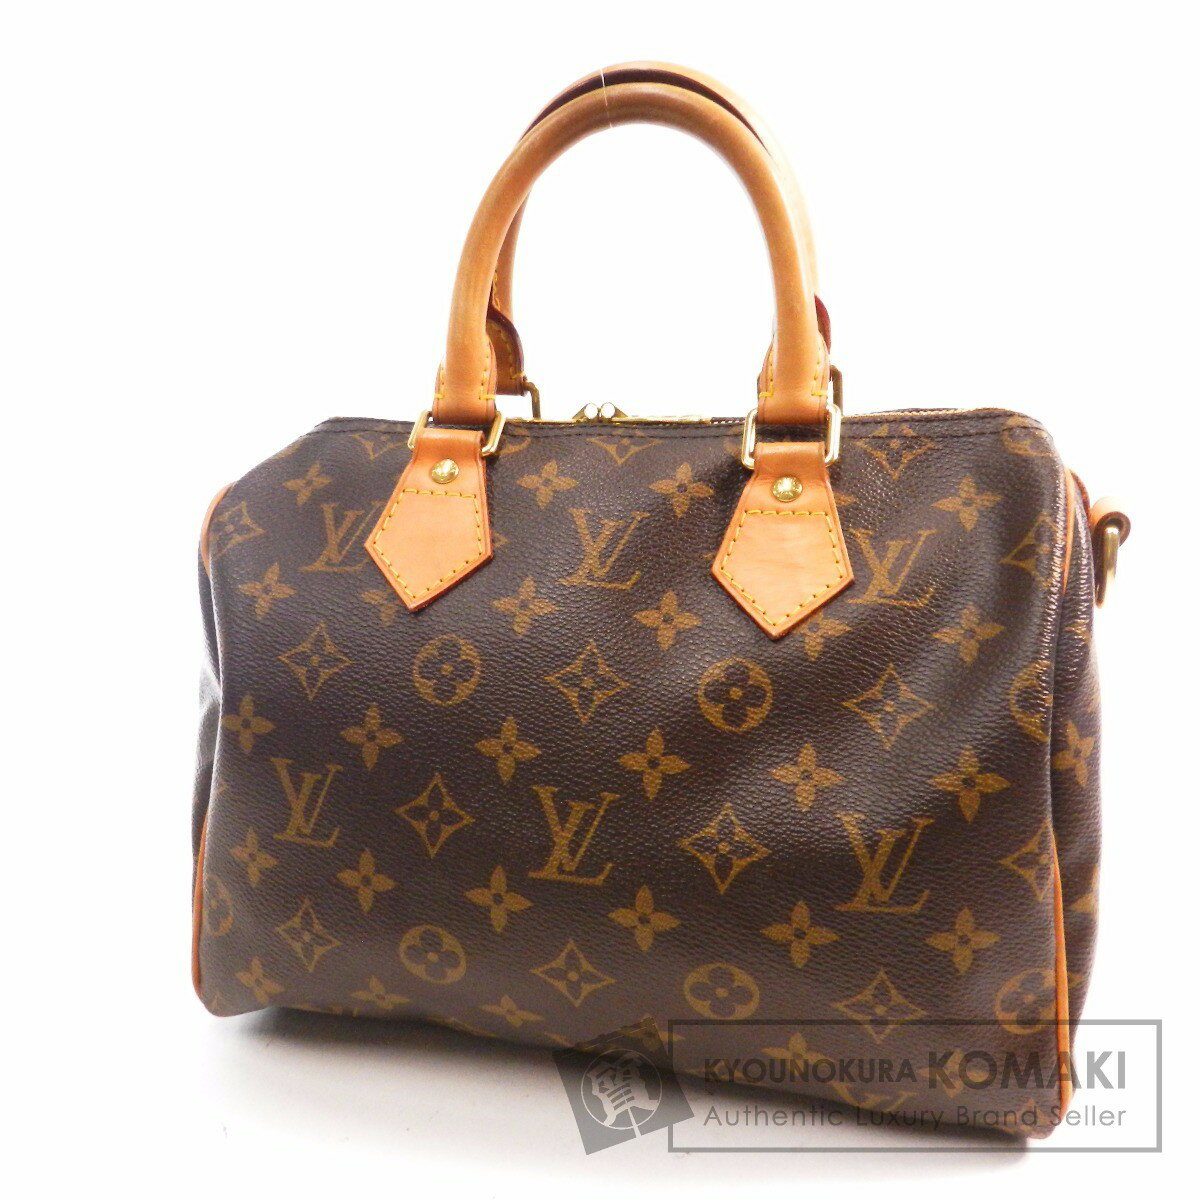 Louis Vuitton Speedy 25 Price Philippines | Confederated Tribes of the Umatilla Indian Reservation